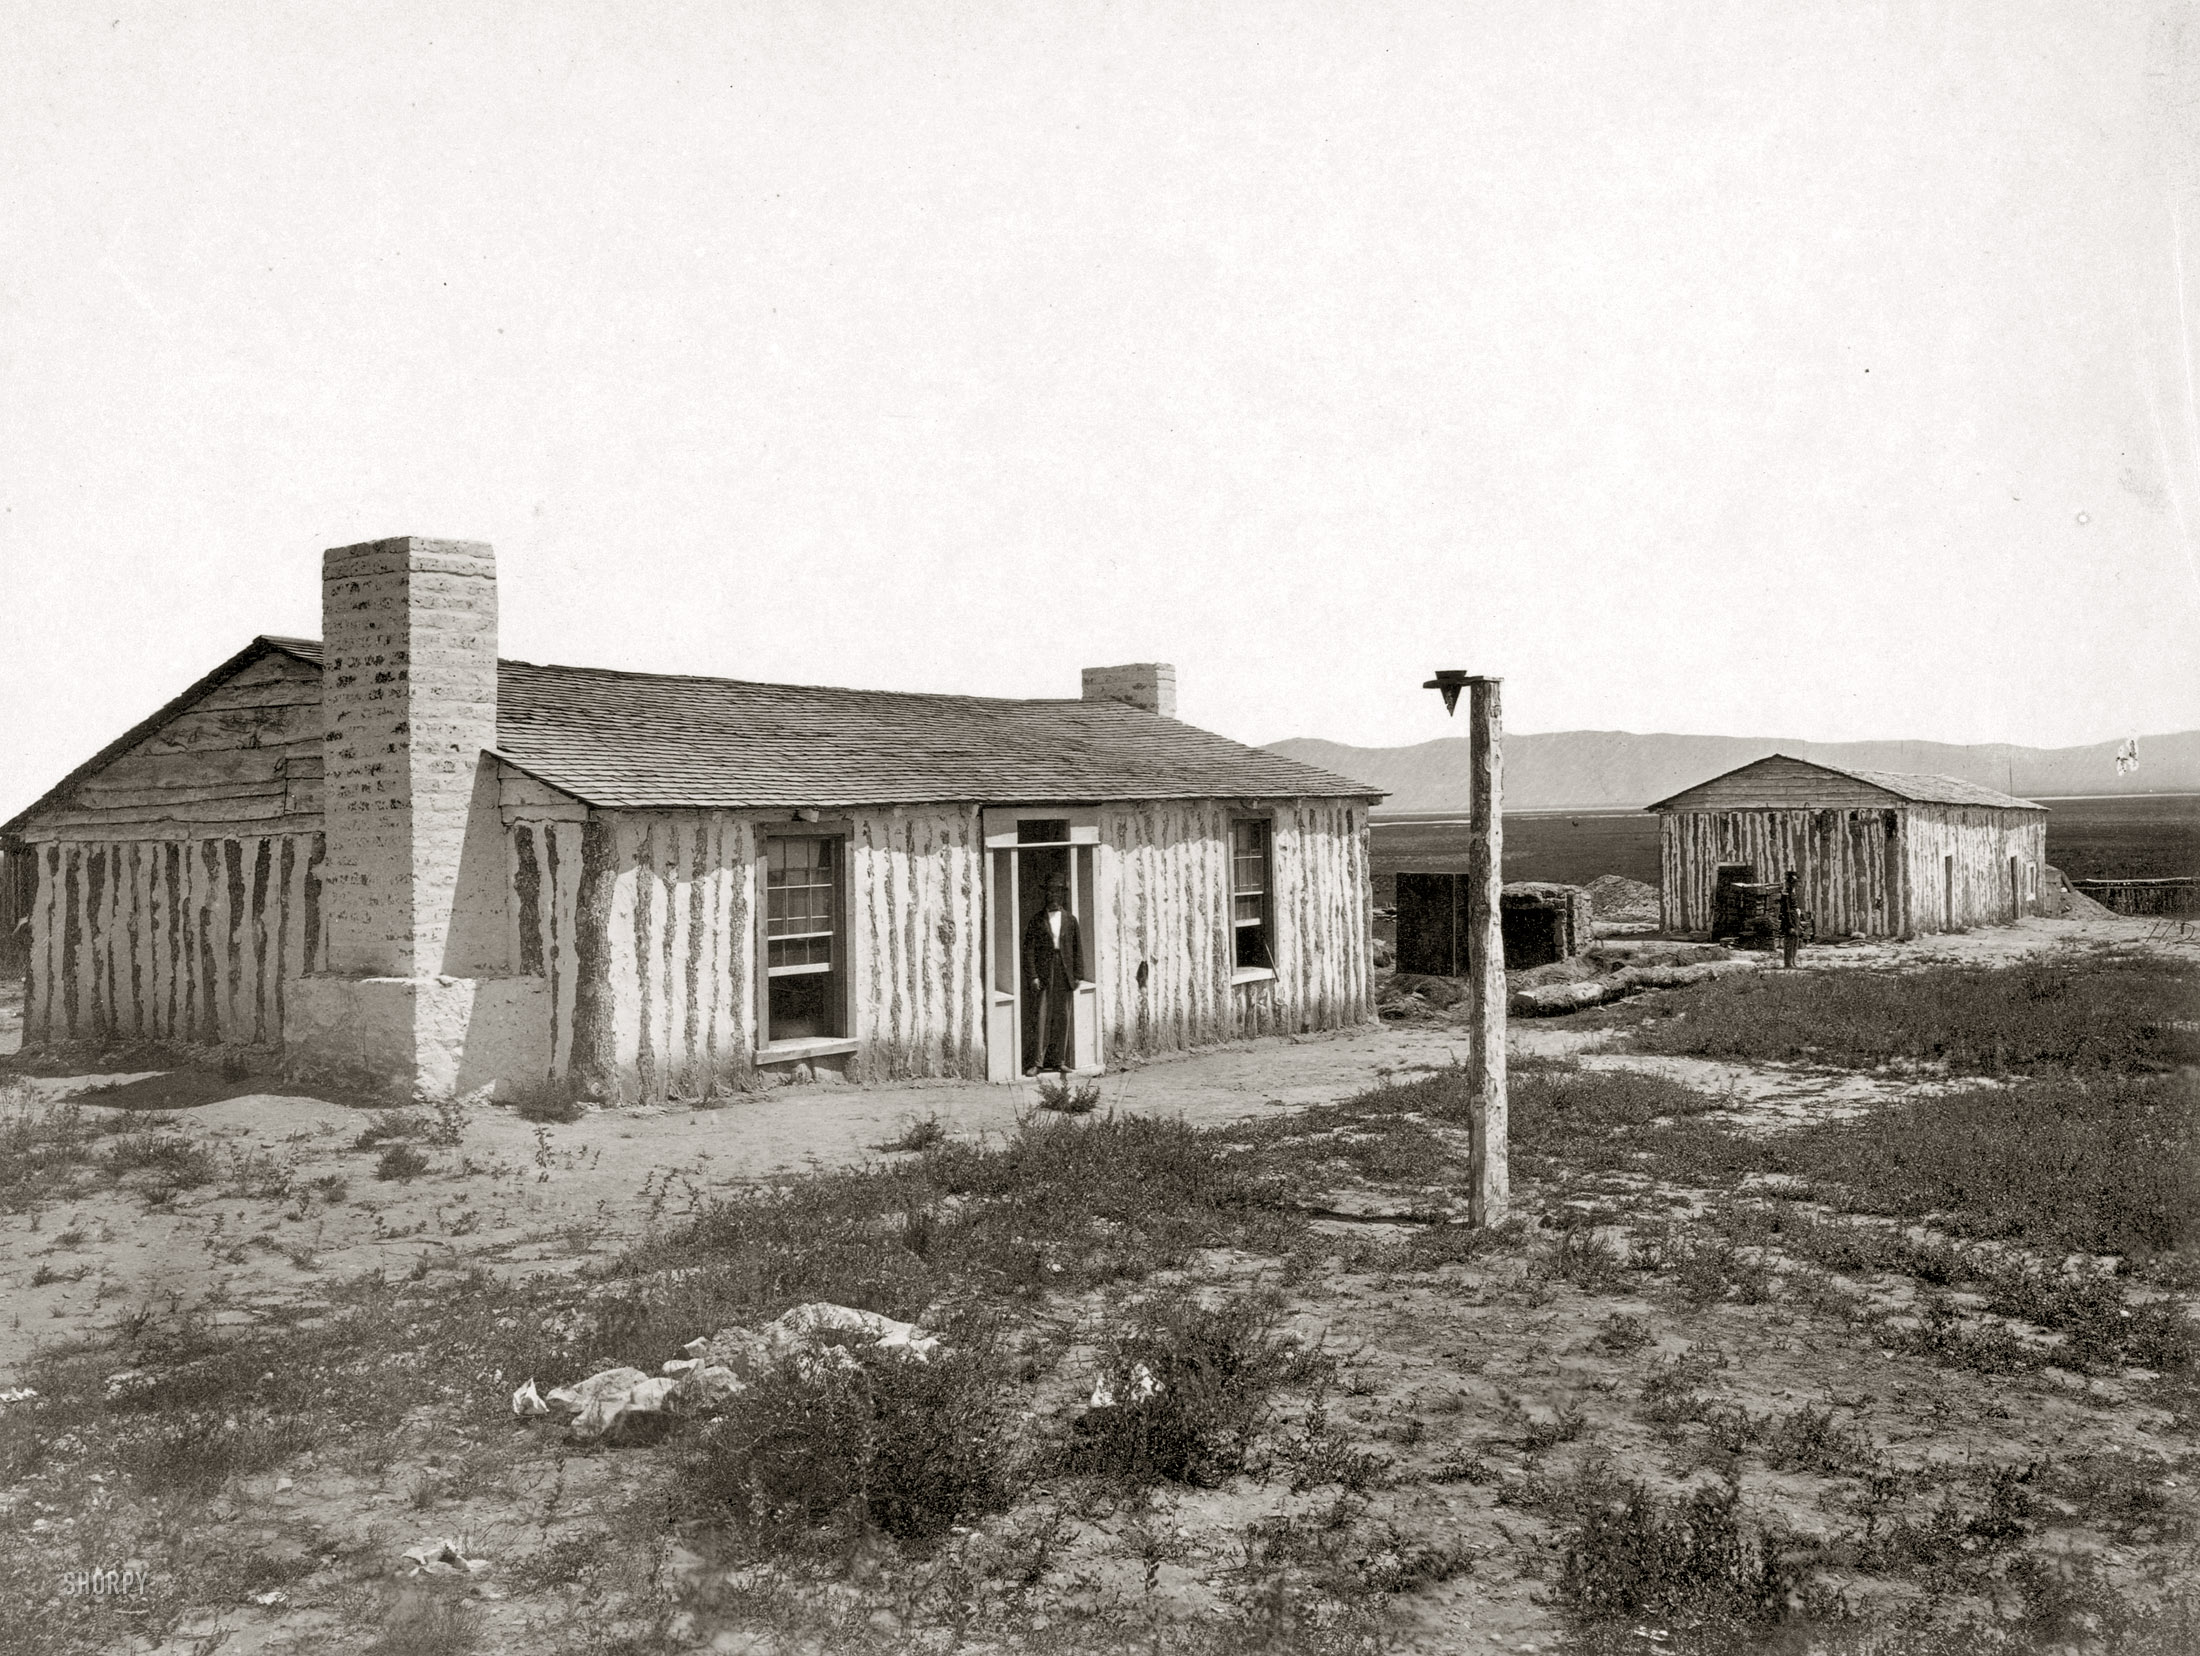 1868. "Fort Ruby, Nevada. Photo showing two houses." Plate 112 from Geological Exploration of the Fortieth Parallel, Army Corps of Engineers. Clarence King, geologist in charge. Albumen print by Timothy H. O'Sullivan. View full size.